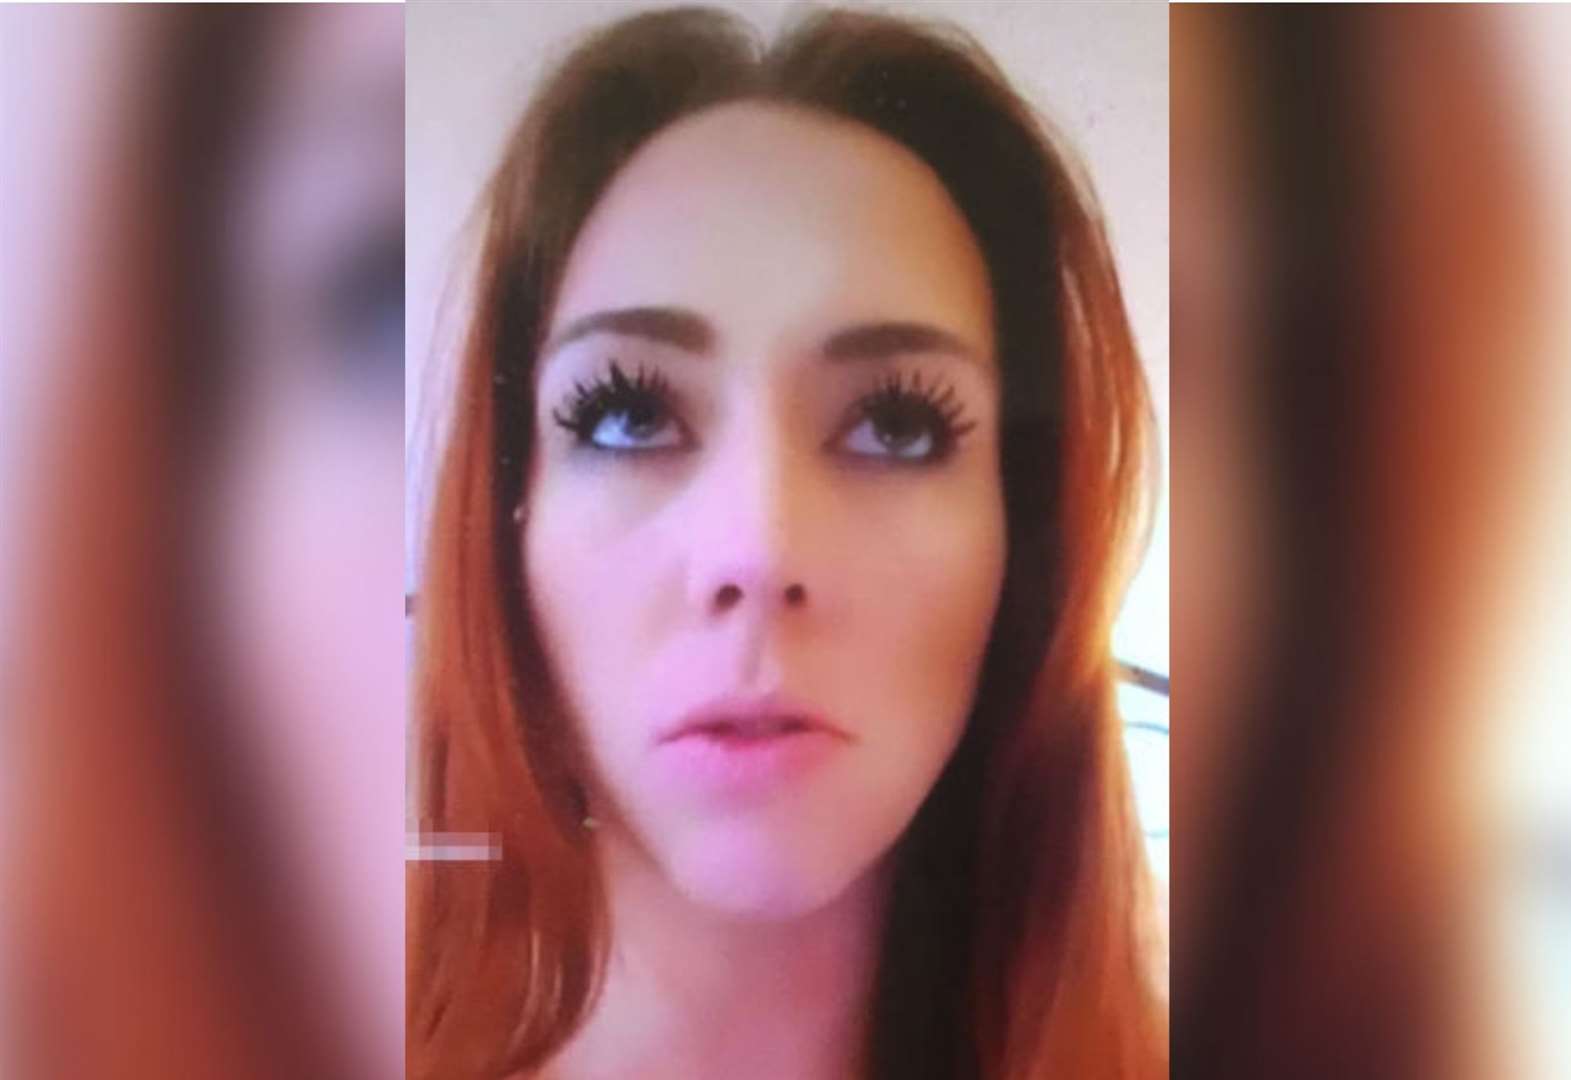 Police search for missing woman, 34